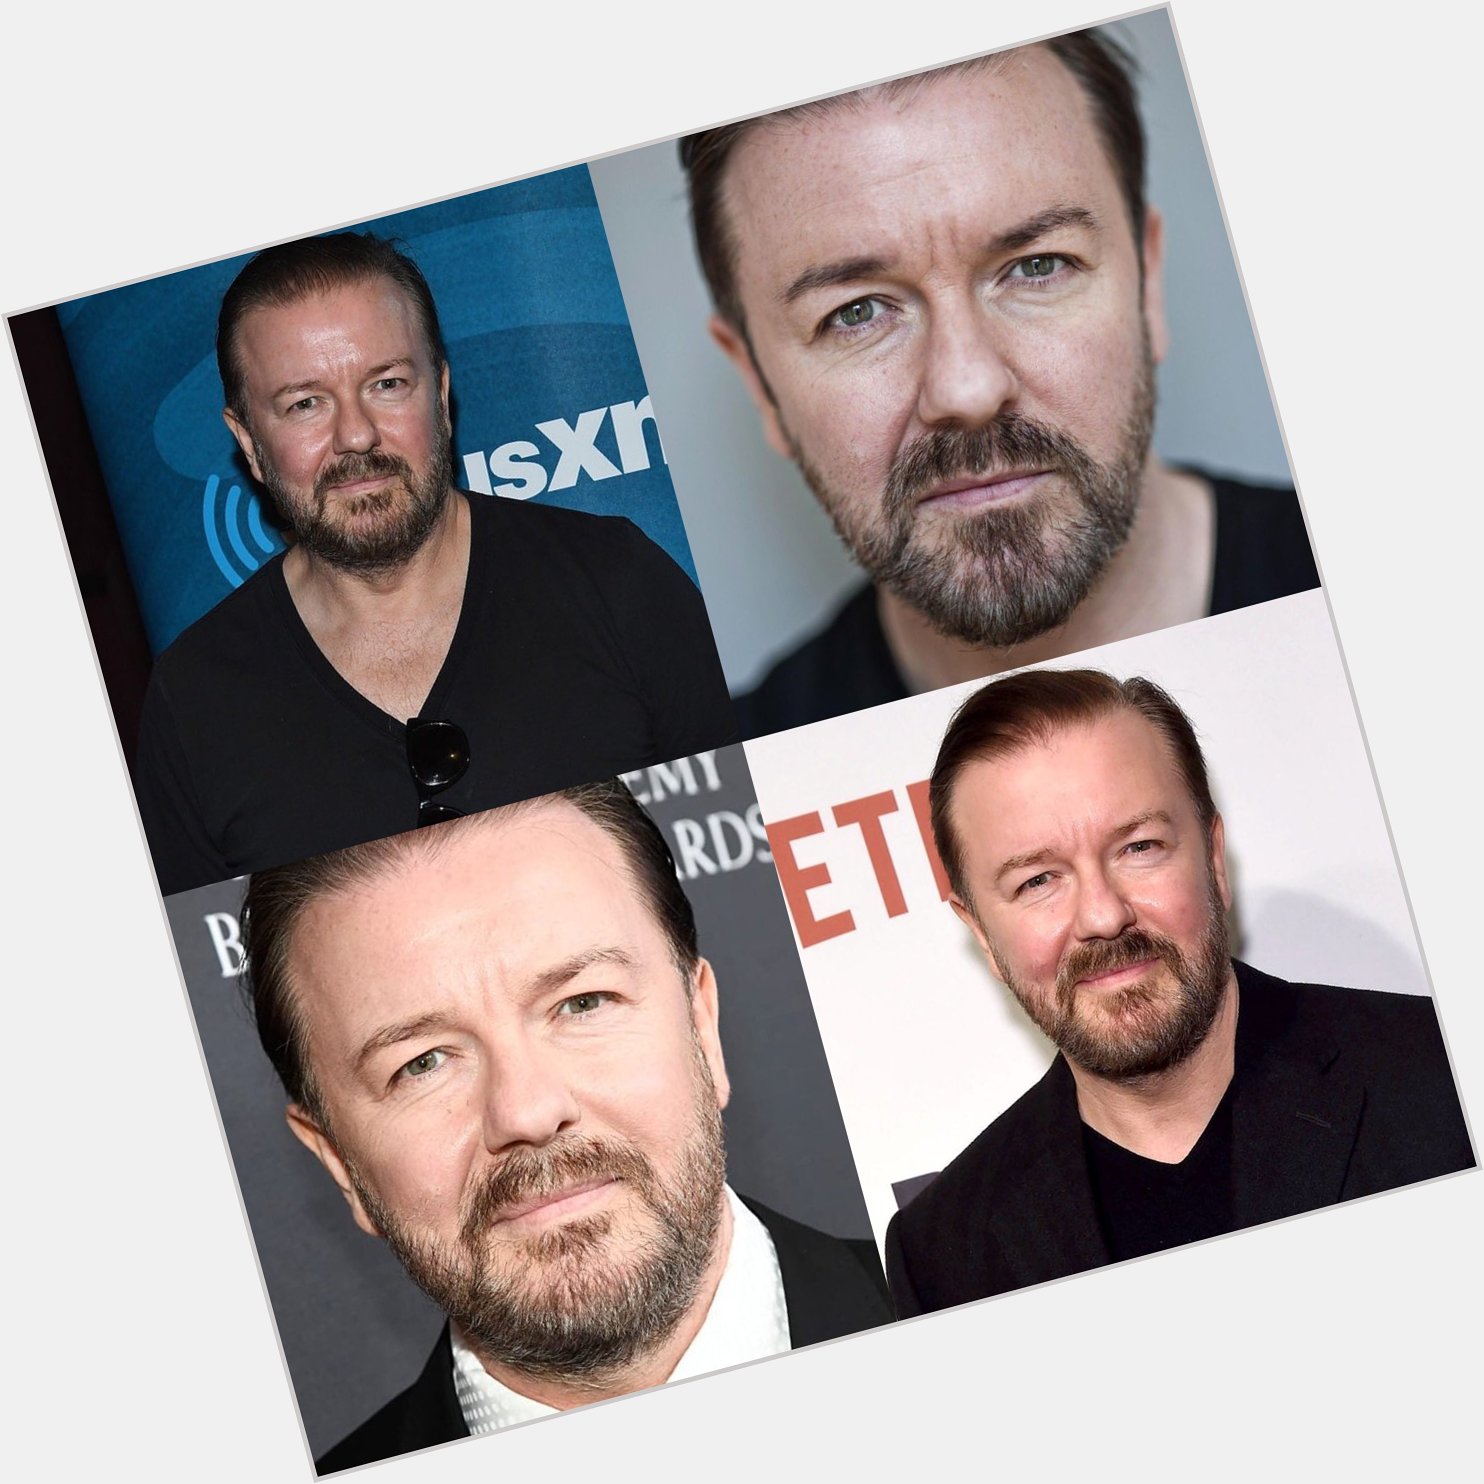 Happy 59 birthday to Ricky Gervais . Hope that he has a wonderful birthday.        